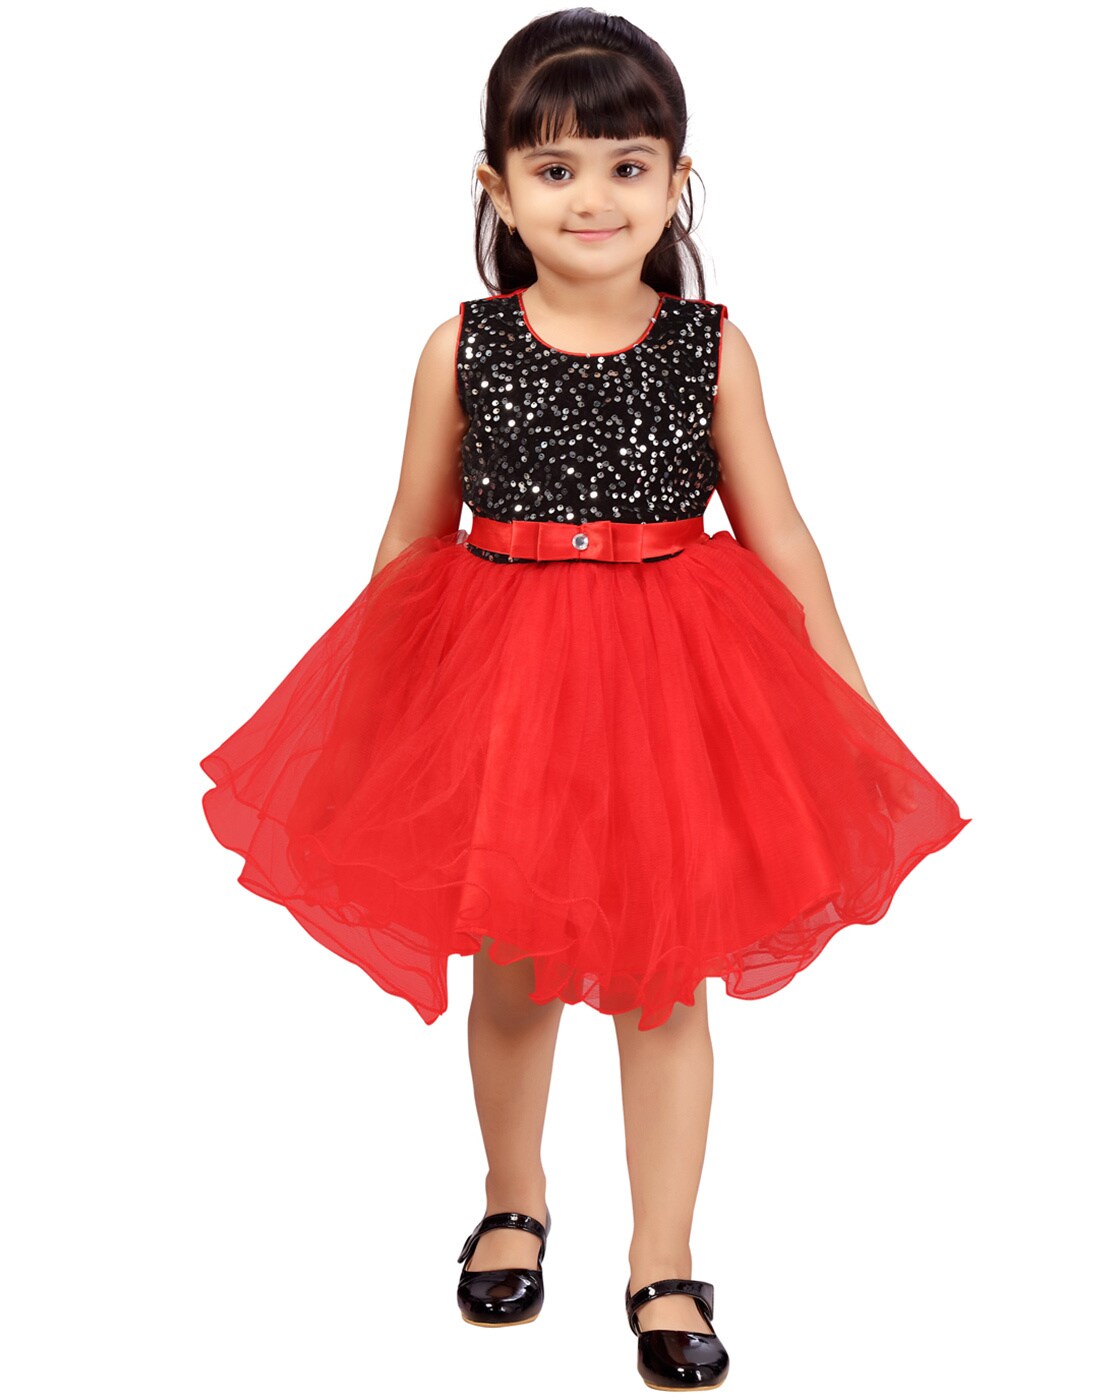 Red Black Dress for Girls Party Frock 3 4 5 6 7 8 9 10 Years Girl Birthday  Dresses Princess Evening Carnival Holiday Dress   AliExpress Mobile